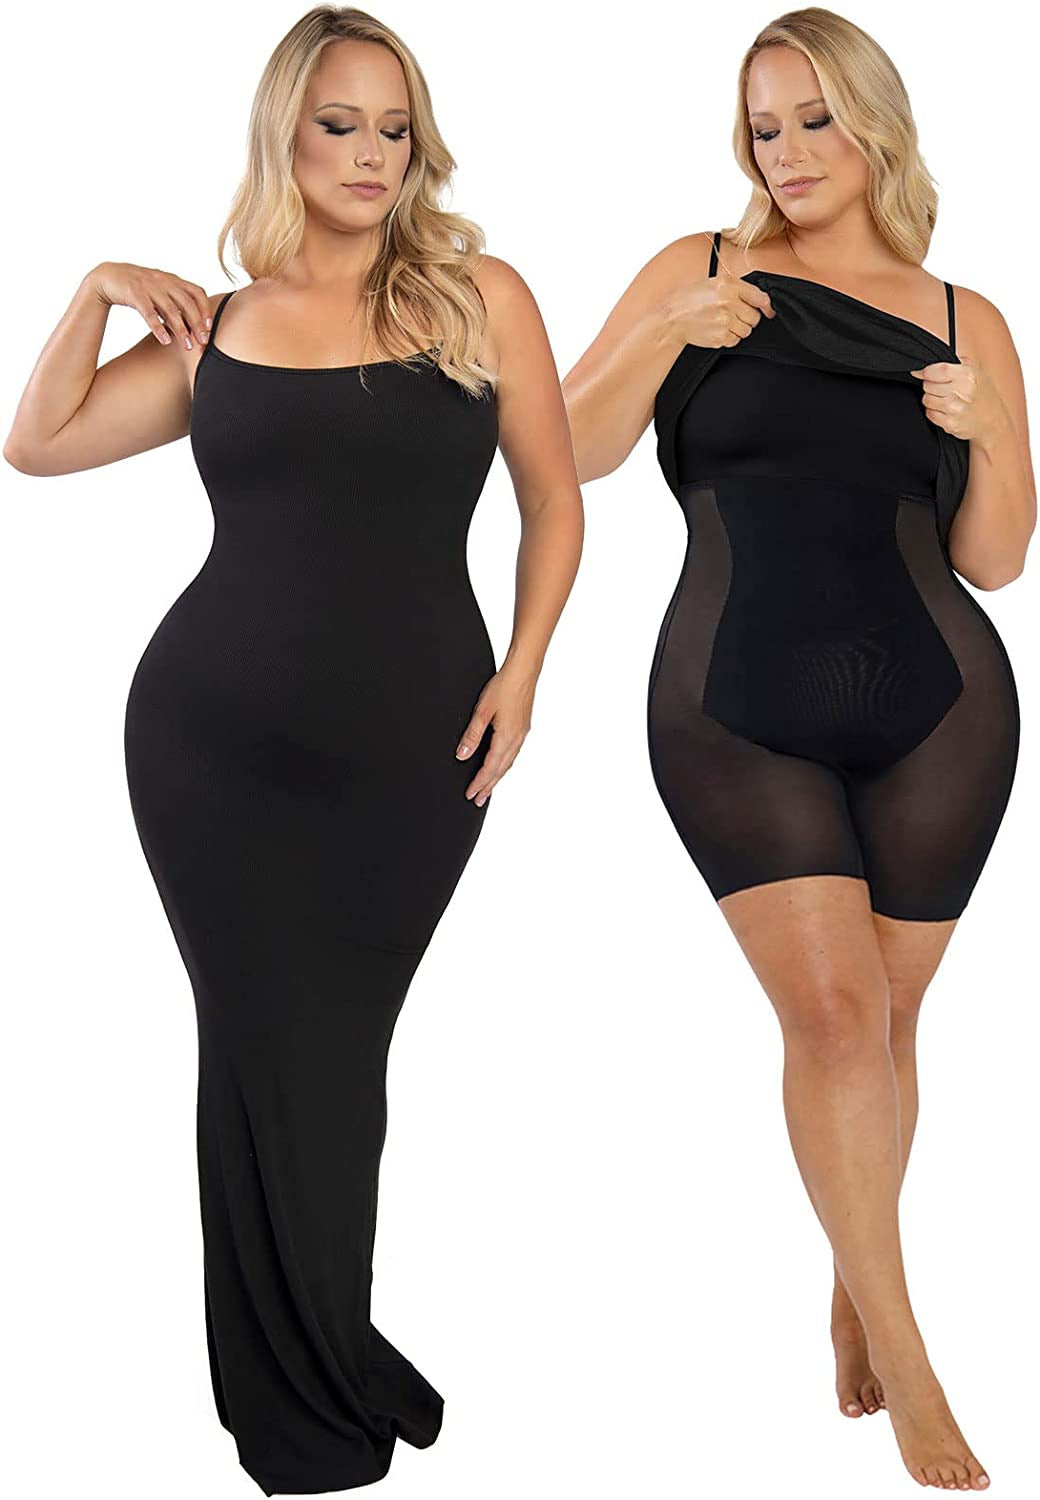 BROWSLUV™ Built-In Shapewear Lounge Dress - GET 50% OFF